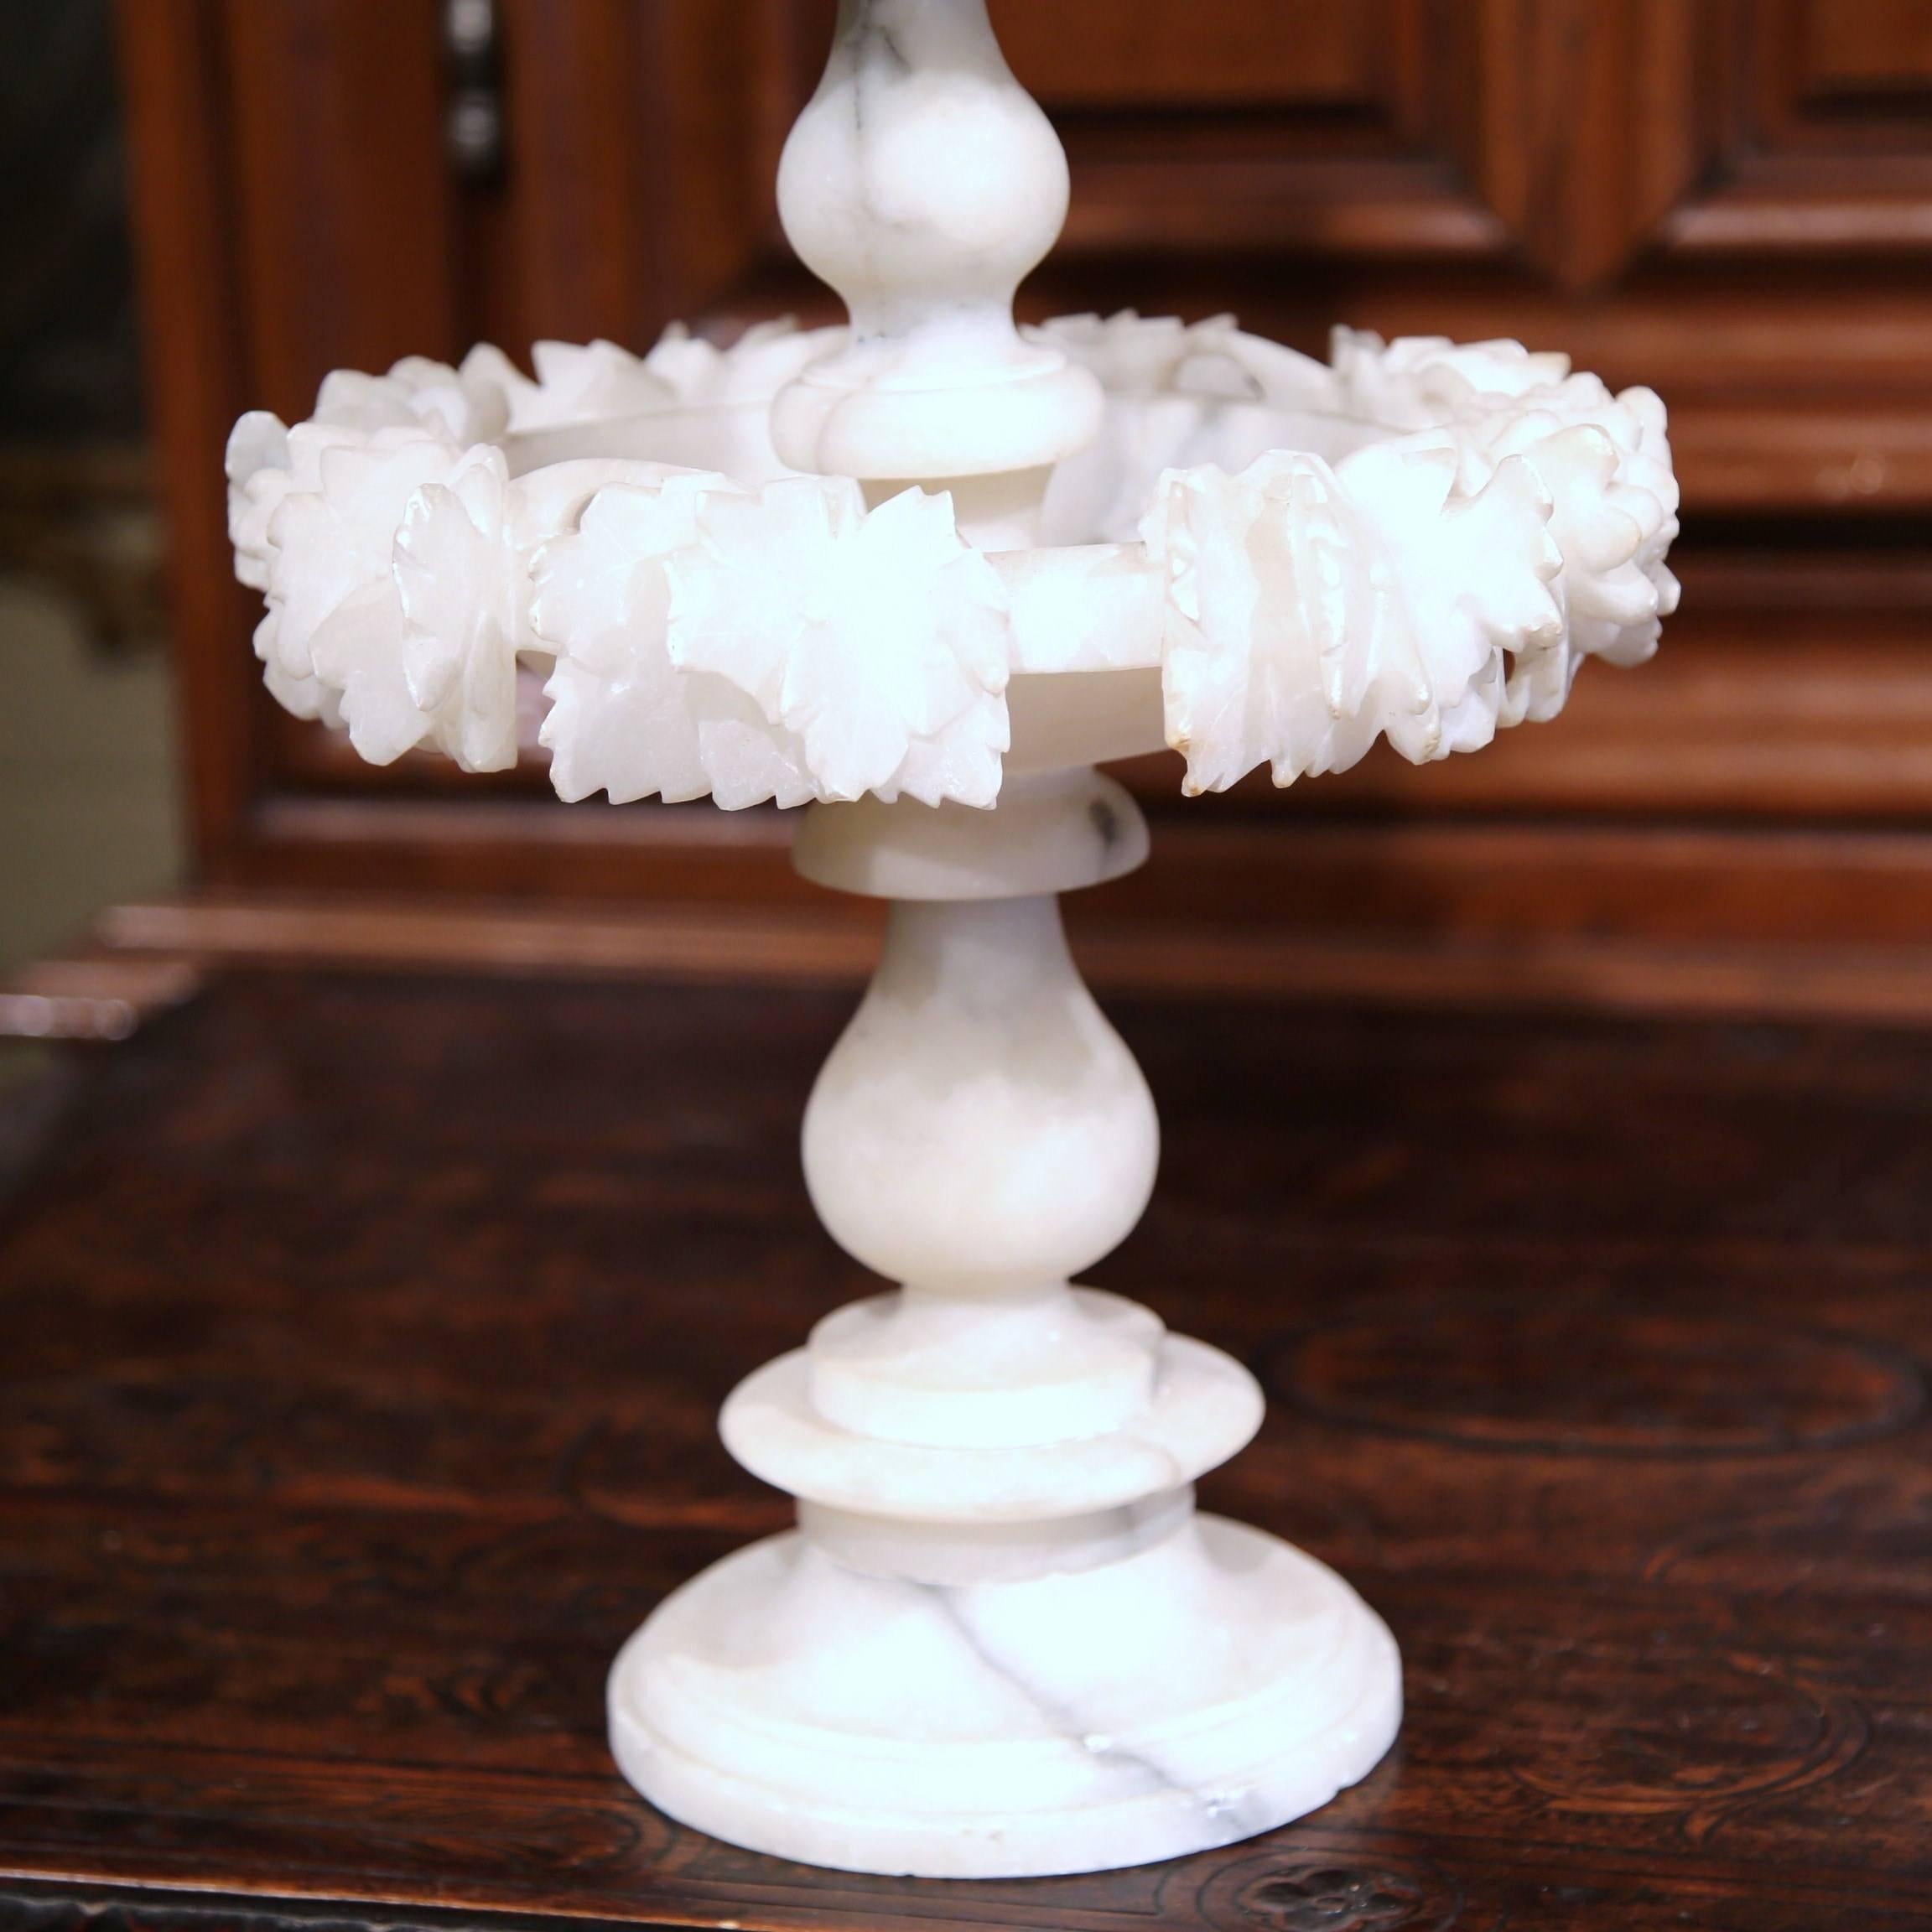 This elegant antique carved white alabaster centerpiece was sculpted in France, circa 1880. The display piece features three, embellished tiers and is crowned with a carved, decorative pediment. The shining decorative vase is in excellent condition